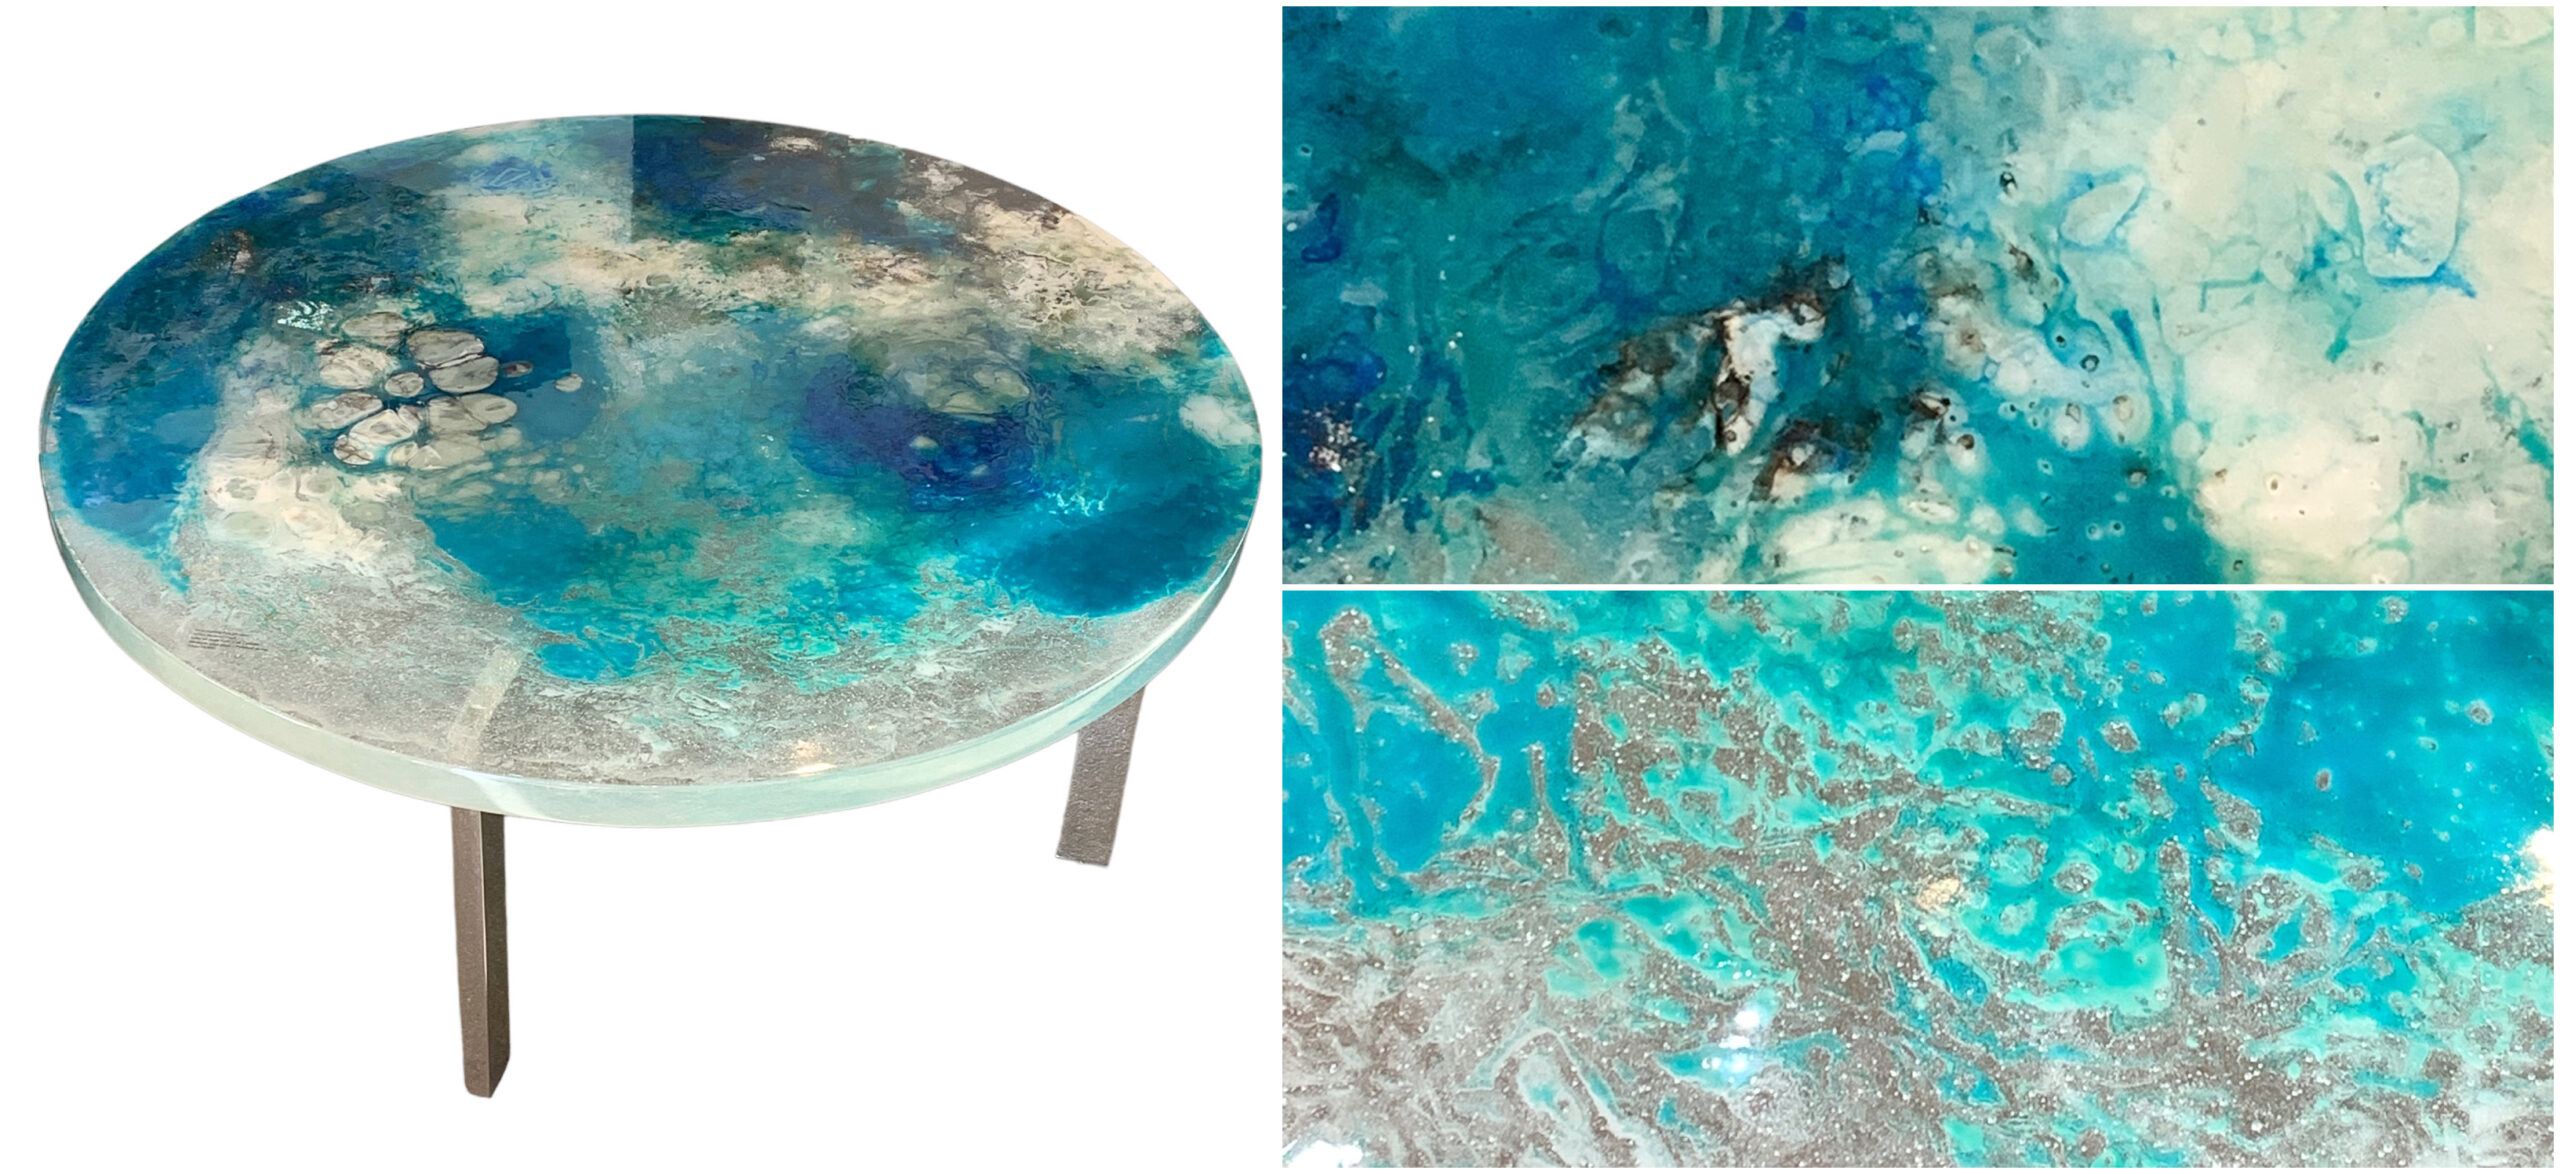 Earthly Perspectives, one of a kind cast glass and polished nickel coffee table by Heather Cuell | Effusion Art Gallery, Invermere BC